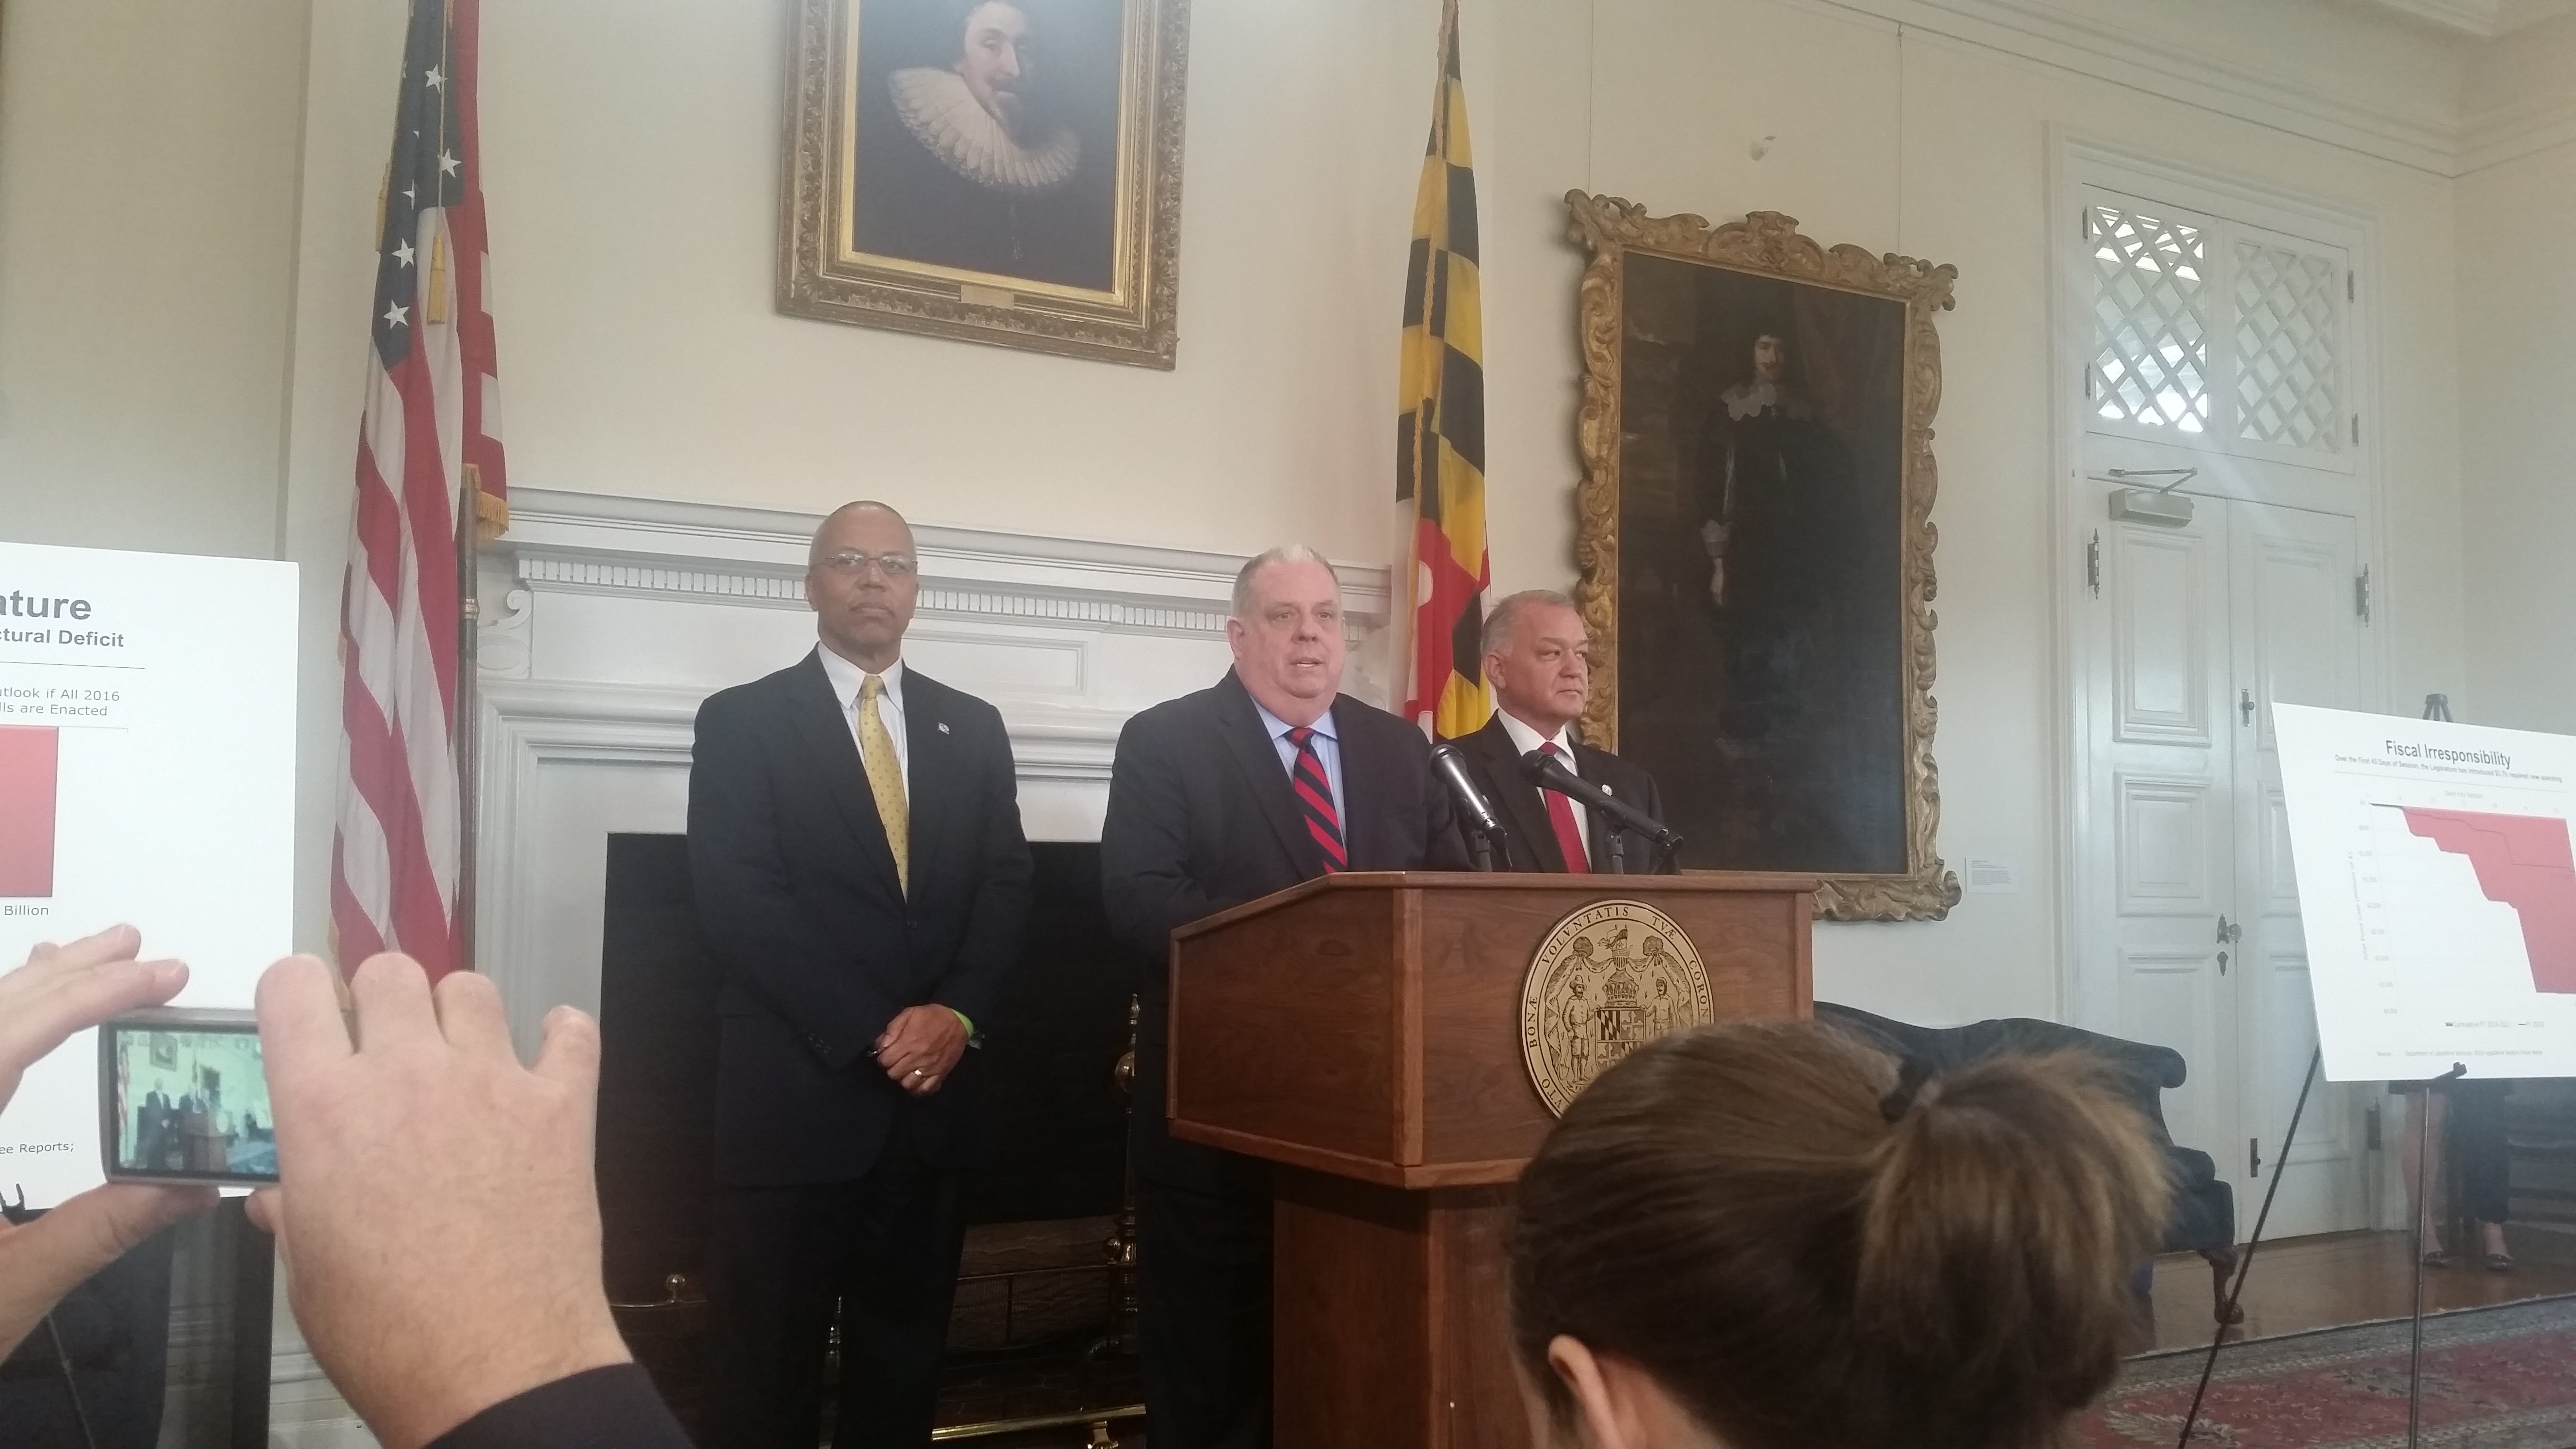 Hogan, along with Lt. Gov. Boyd Rutherford and Secretary of Budget and Management David Brinkley, called on legislators to pass mandate reform.